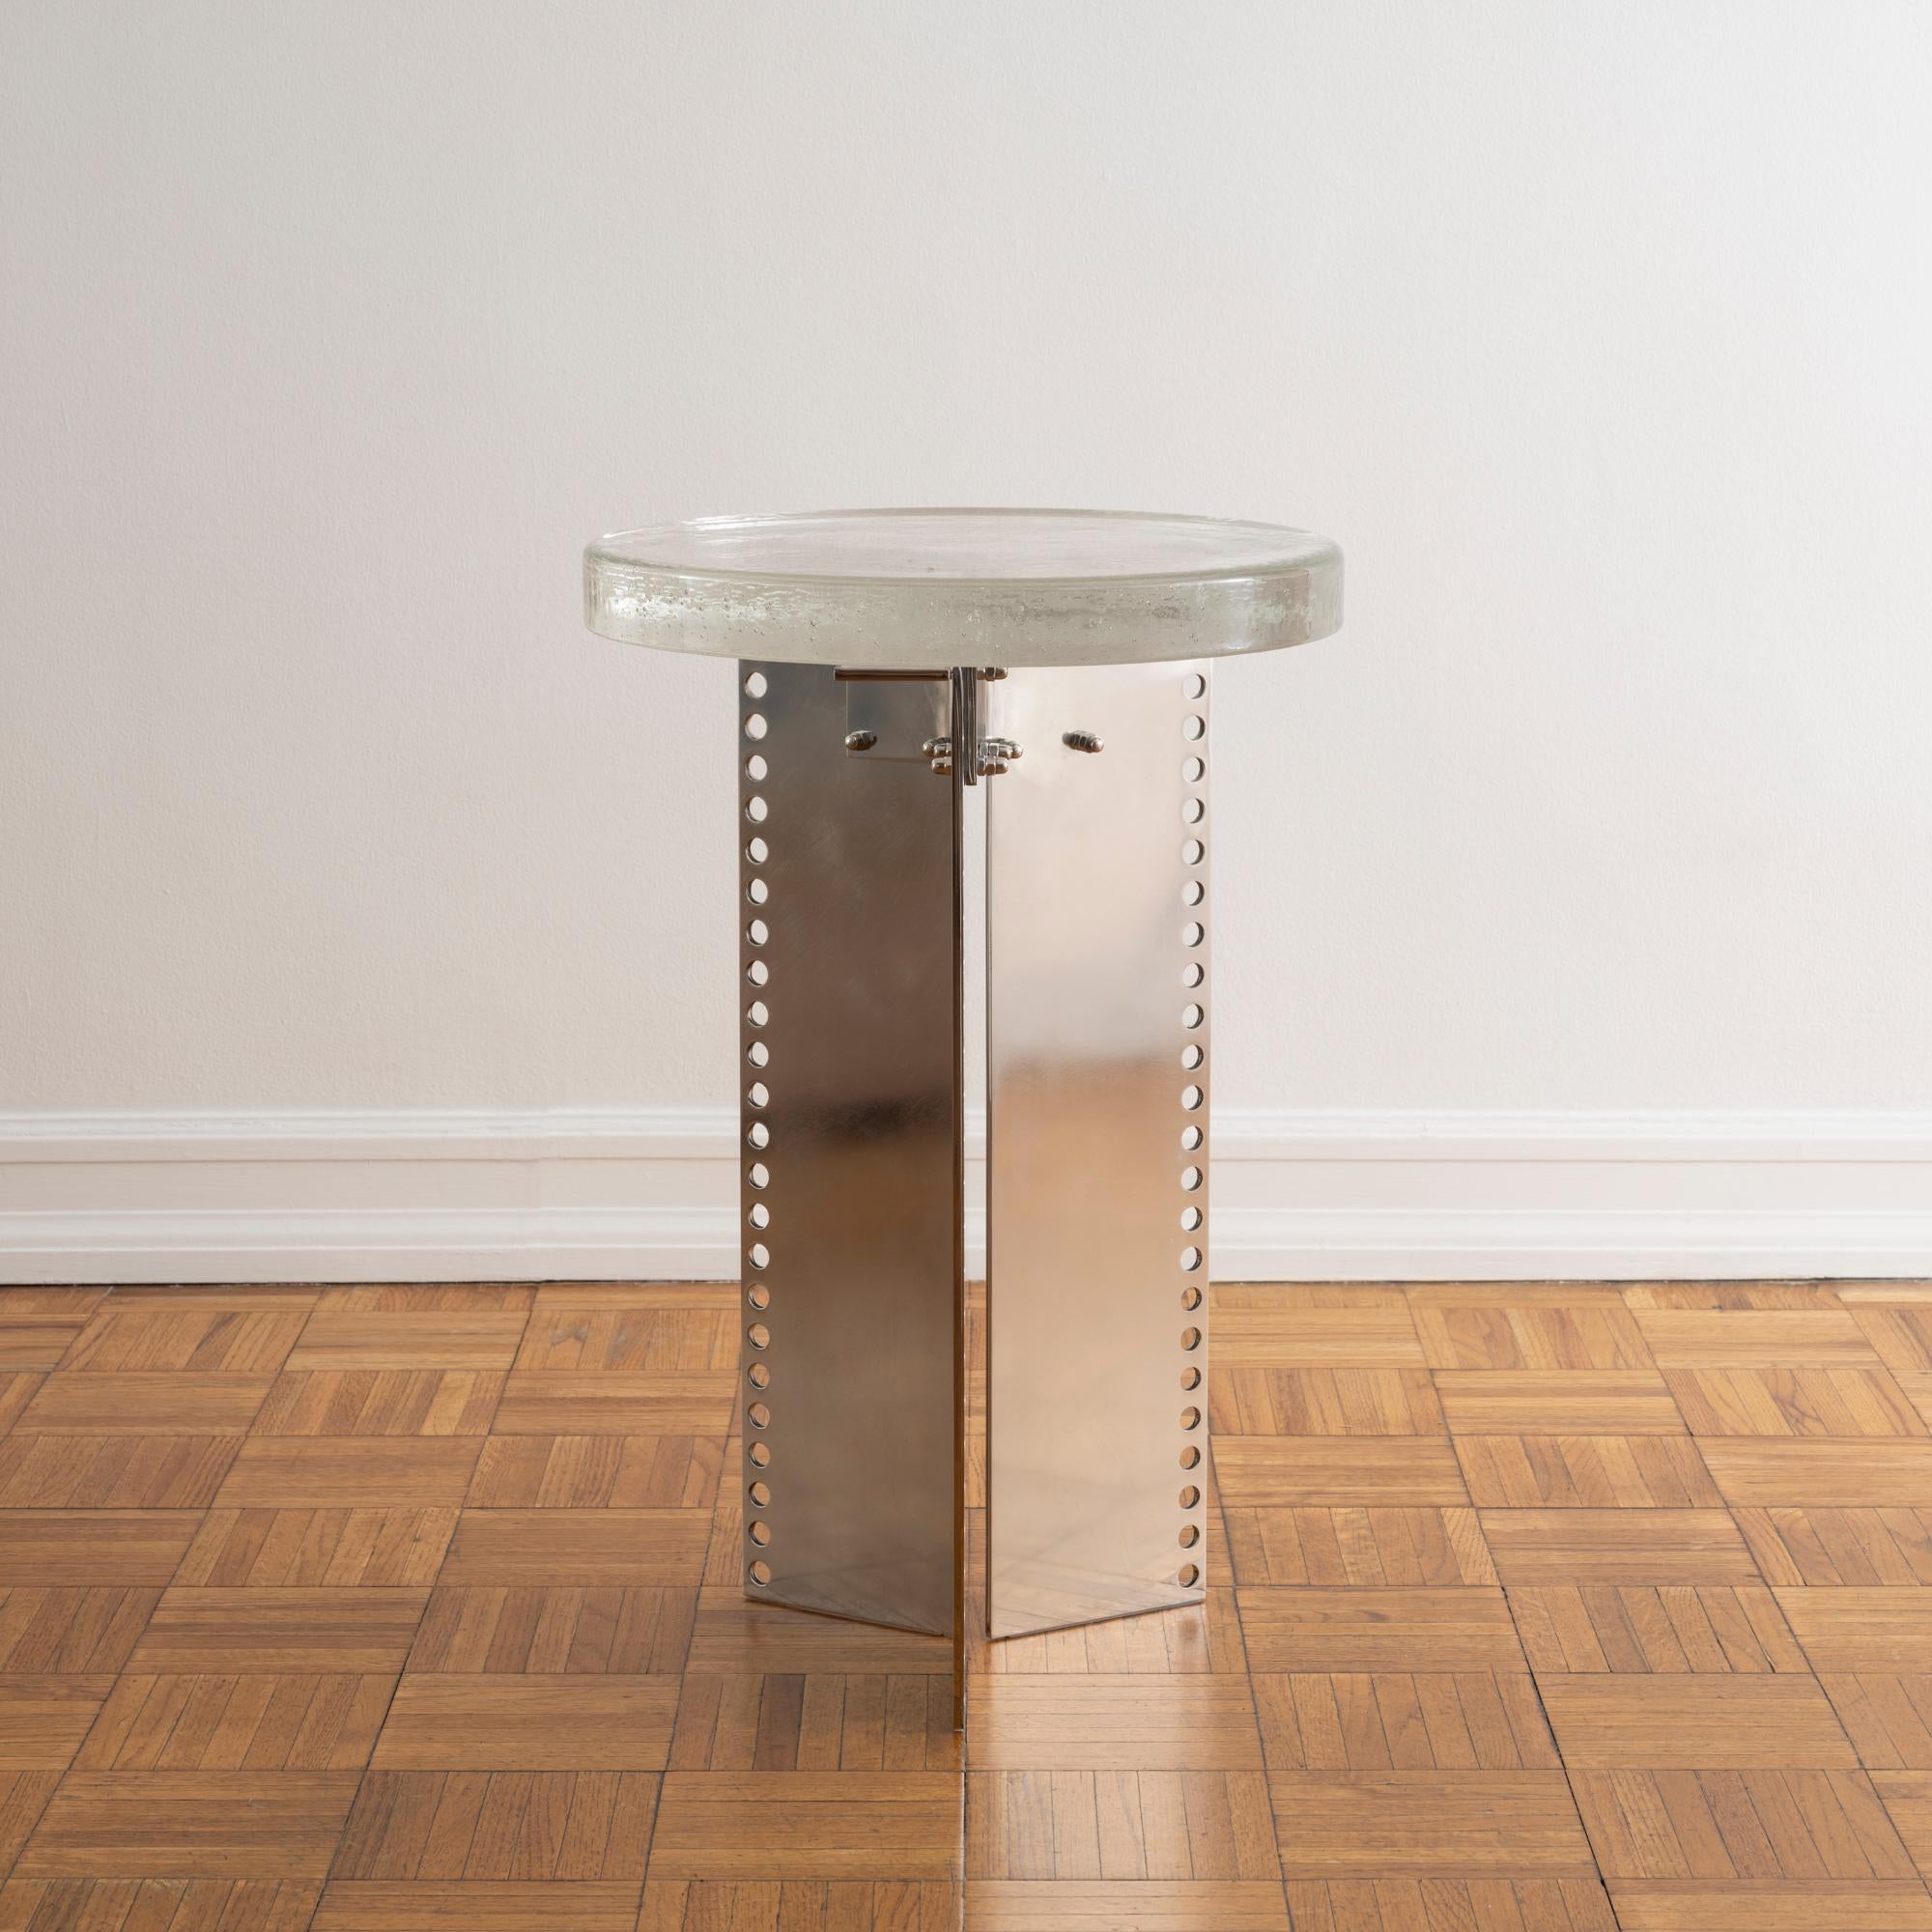 Contemporary accent table comprised of a round glass top fixed to an architectural base of perforated stainless steel. 

The glass is produced by crucible casting, which creates an organic rippled texture on the underside and features natural chill